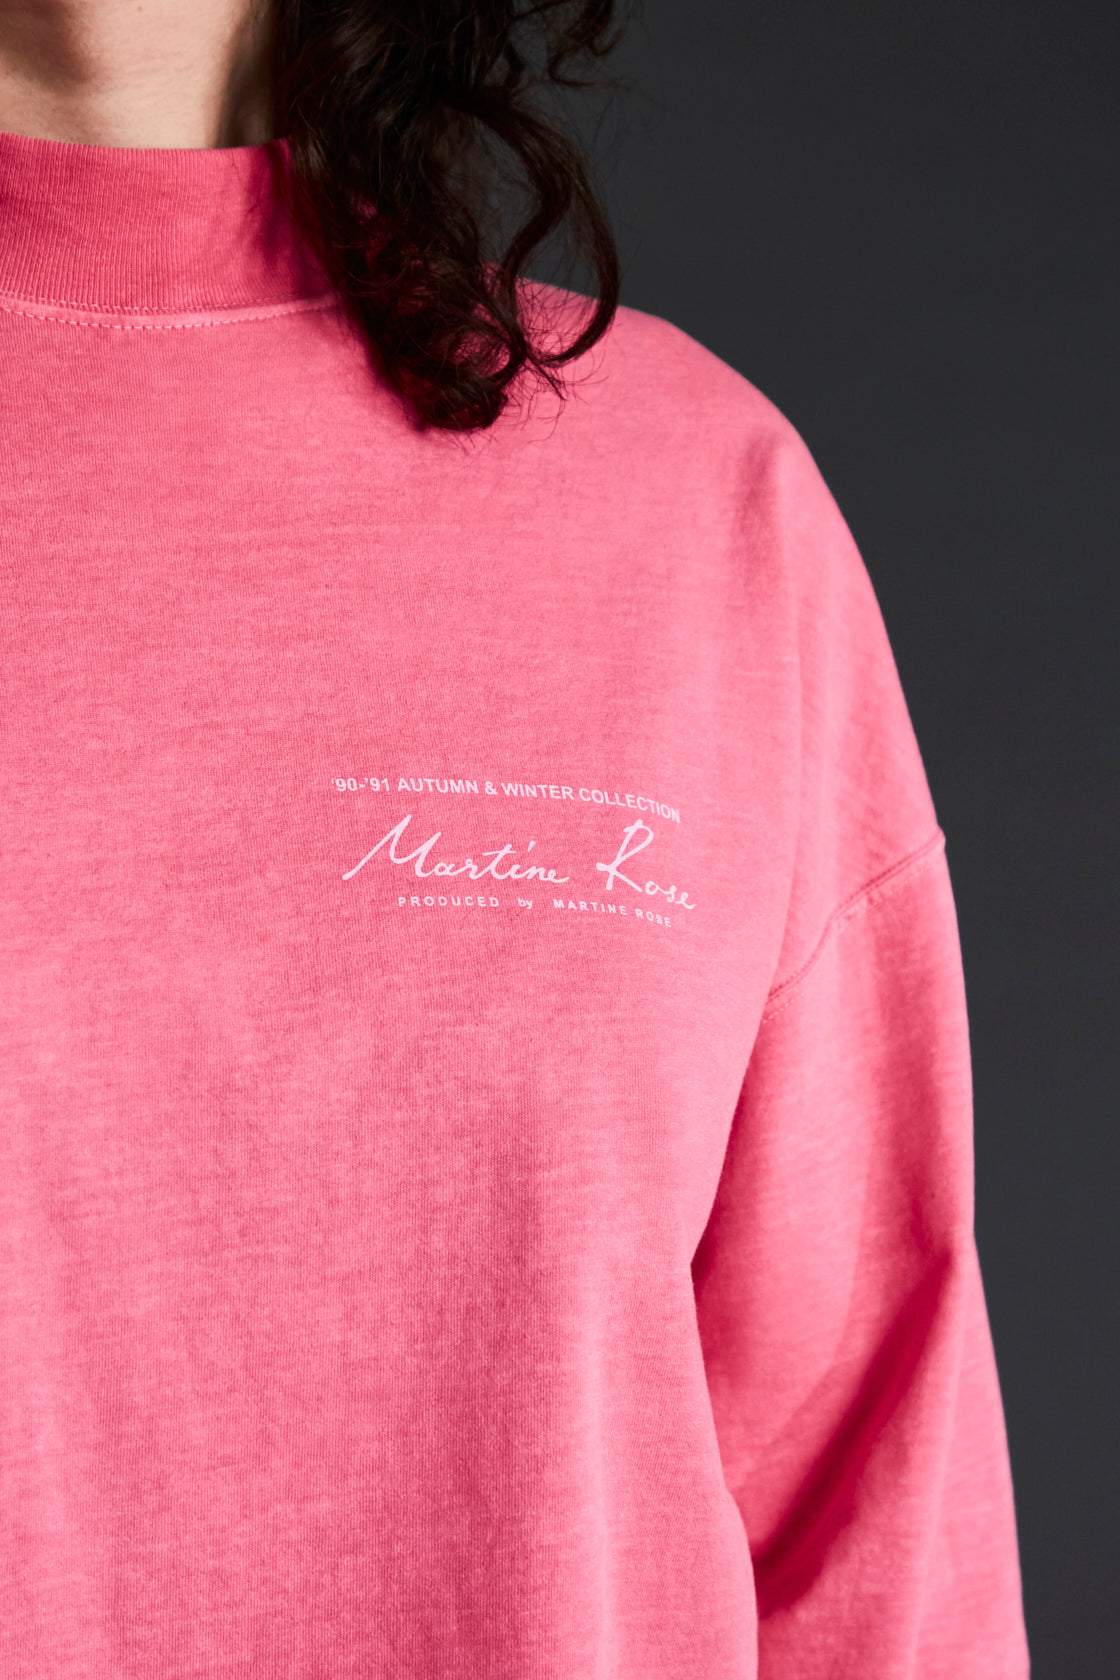 Martine Rose Classic T-Shirt — SLOW WAVES